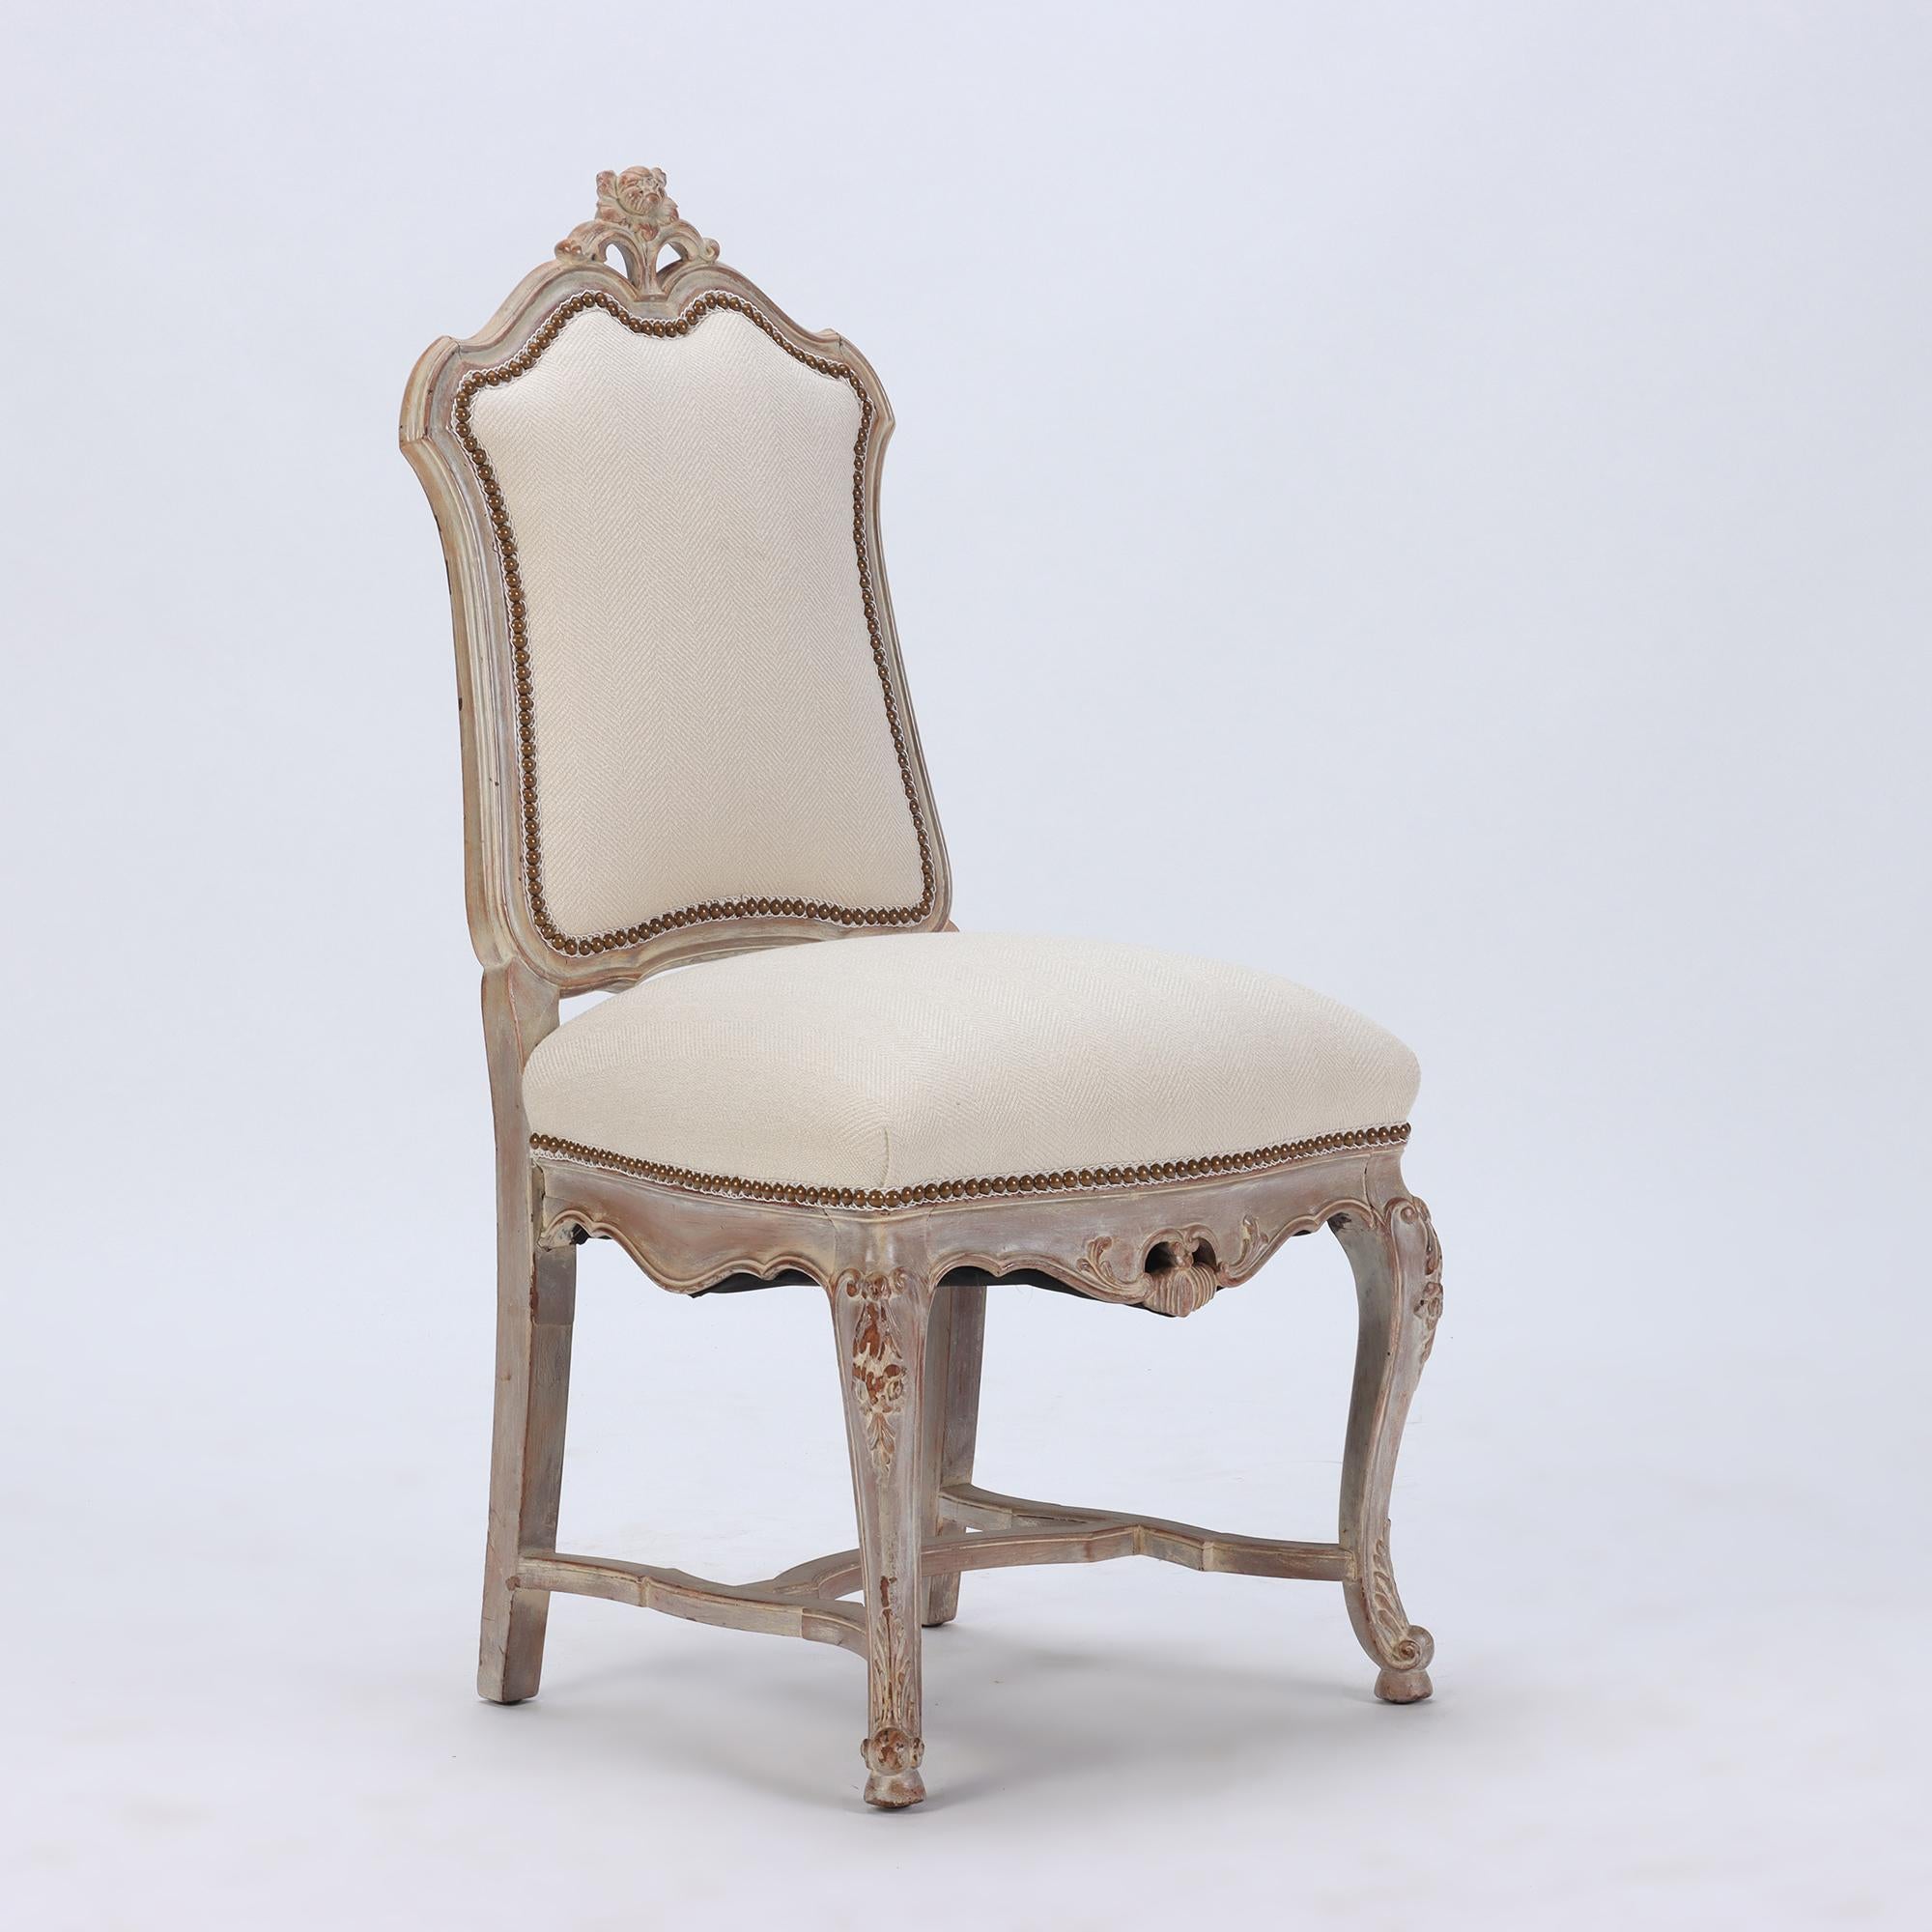 A set of six carved and painted Regency style upholstered dining chairs. Pickled walnut. C 1920.